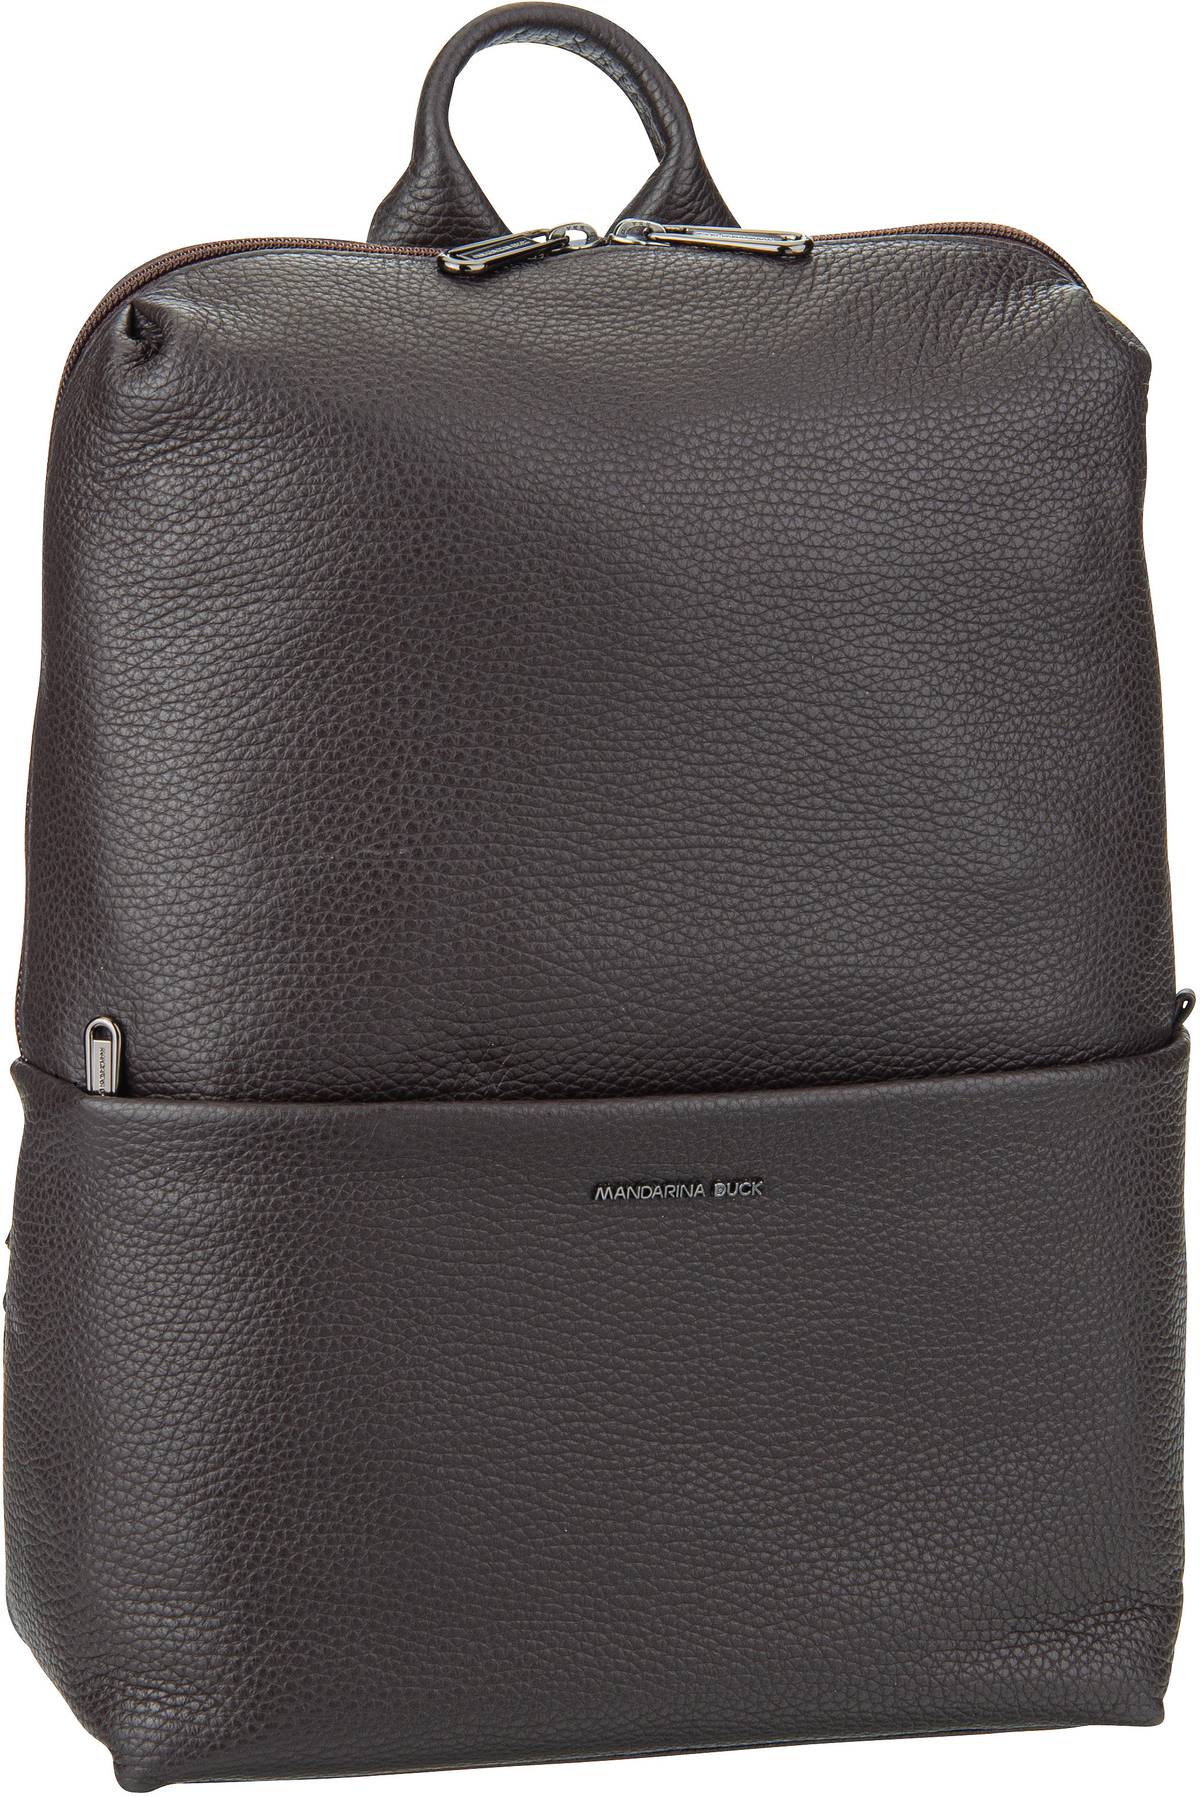 Mandarina Duck Mellow Leather Squared Backpack FZT38 - Mole